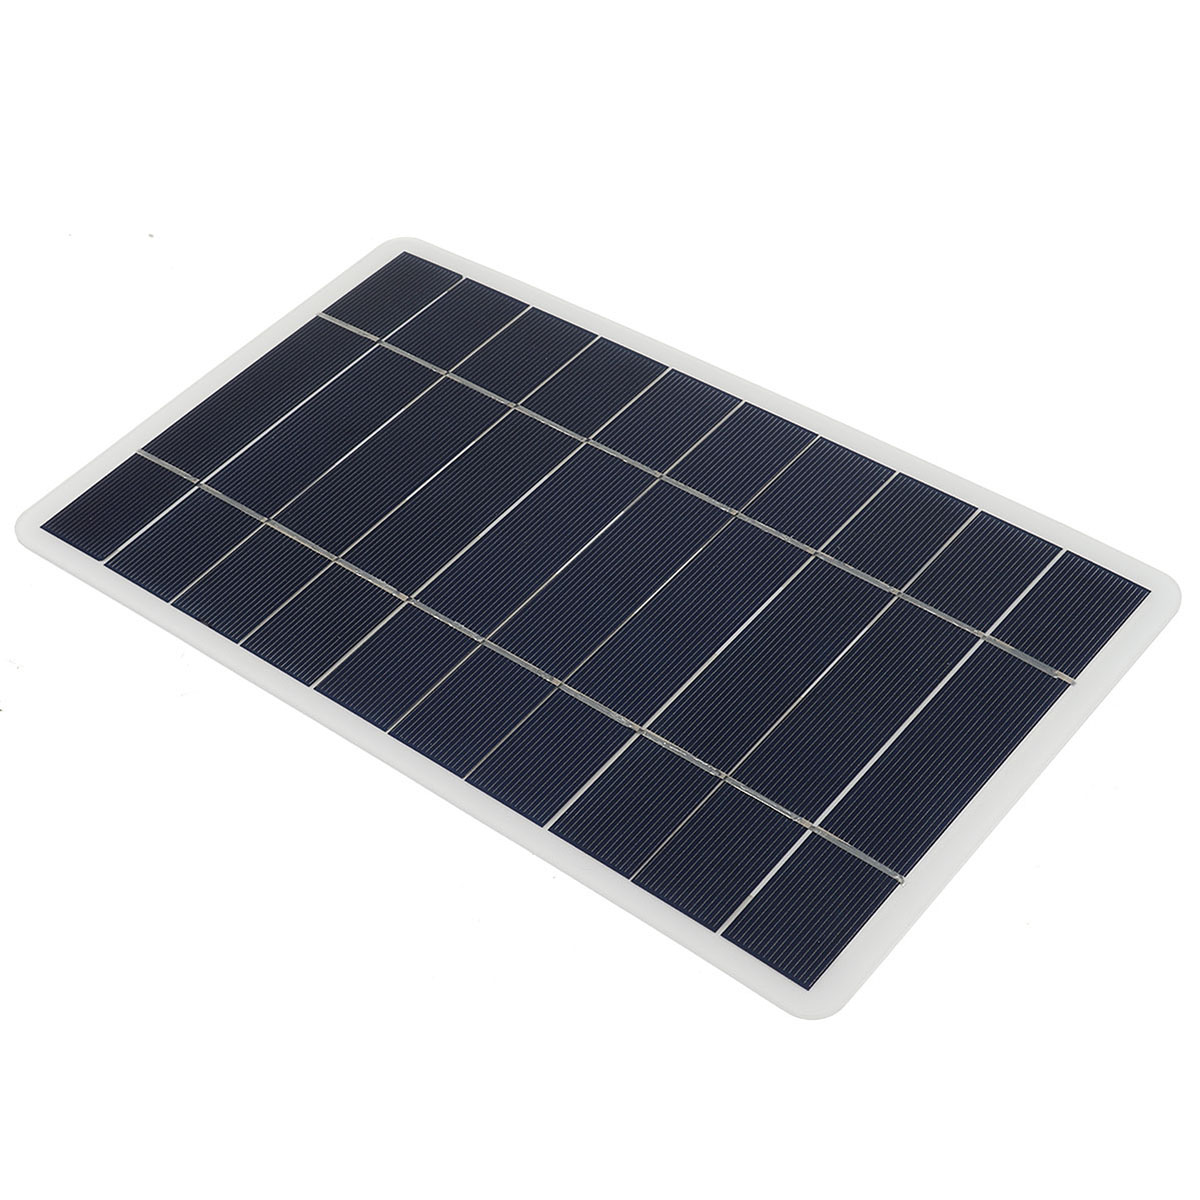 8W-5V-USB-Monocrystalline-Silicon-Solar-Panel-Phone-Car-USB-Battery-Outdoor-Charger-1873505-3